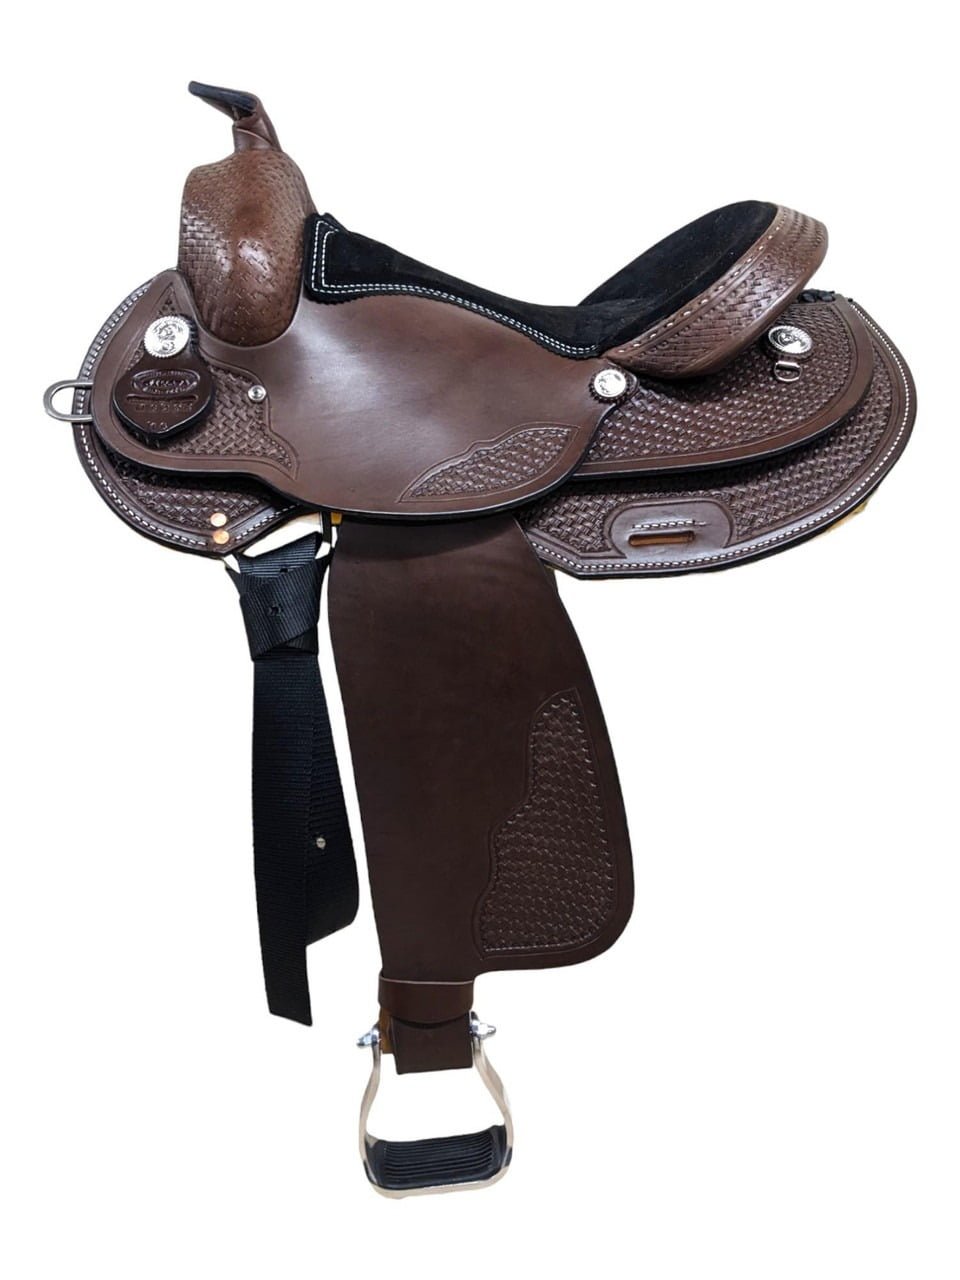 In this stunning Dakota trail-reining combo saddle, you'll be able to spin like a pro in the arena and rock the trails. Smooth leather and a basket stamped tooling complete this saddle. Silver conchos and double, rounded skirts finish the saddle. This skirt style is custom and you cannot find these everywhere! This is the same Dakota reiner you love, but with nice rounded skirts to accommodate for any horse's back. Weight: Approx. 25 lbs Gullet: 7" mid-concho to mid-concho Skirt Length: 26.5" *Due to supply chain issues, leather color and seat color may vary slightly from pictures. Buyers be advised*